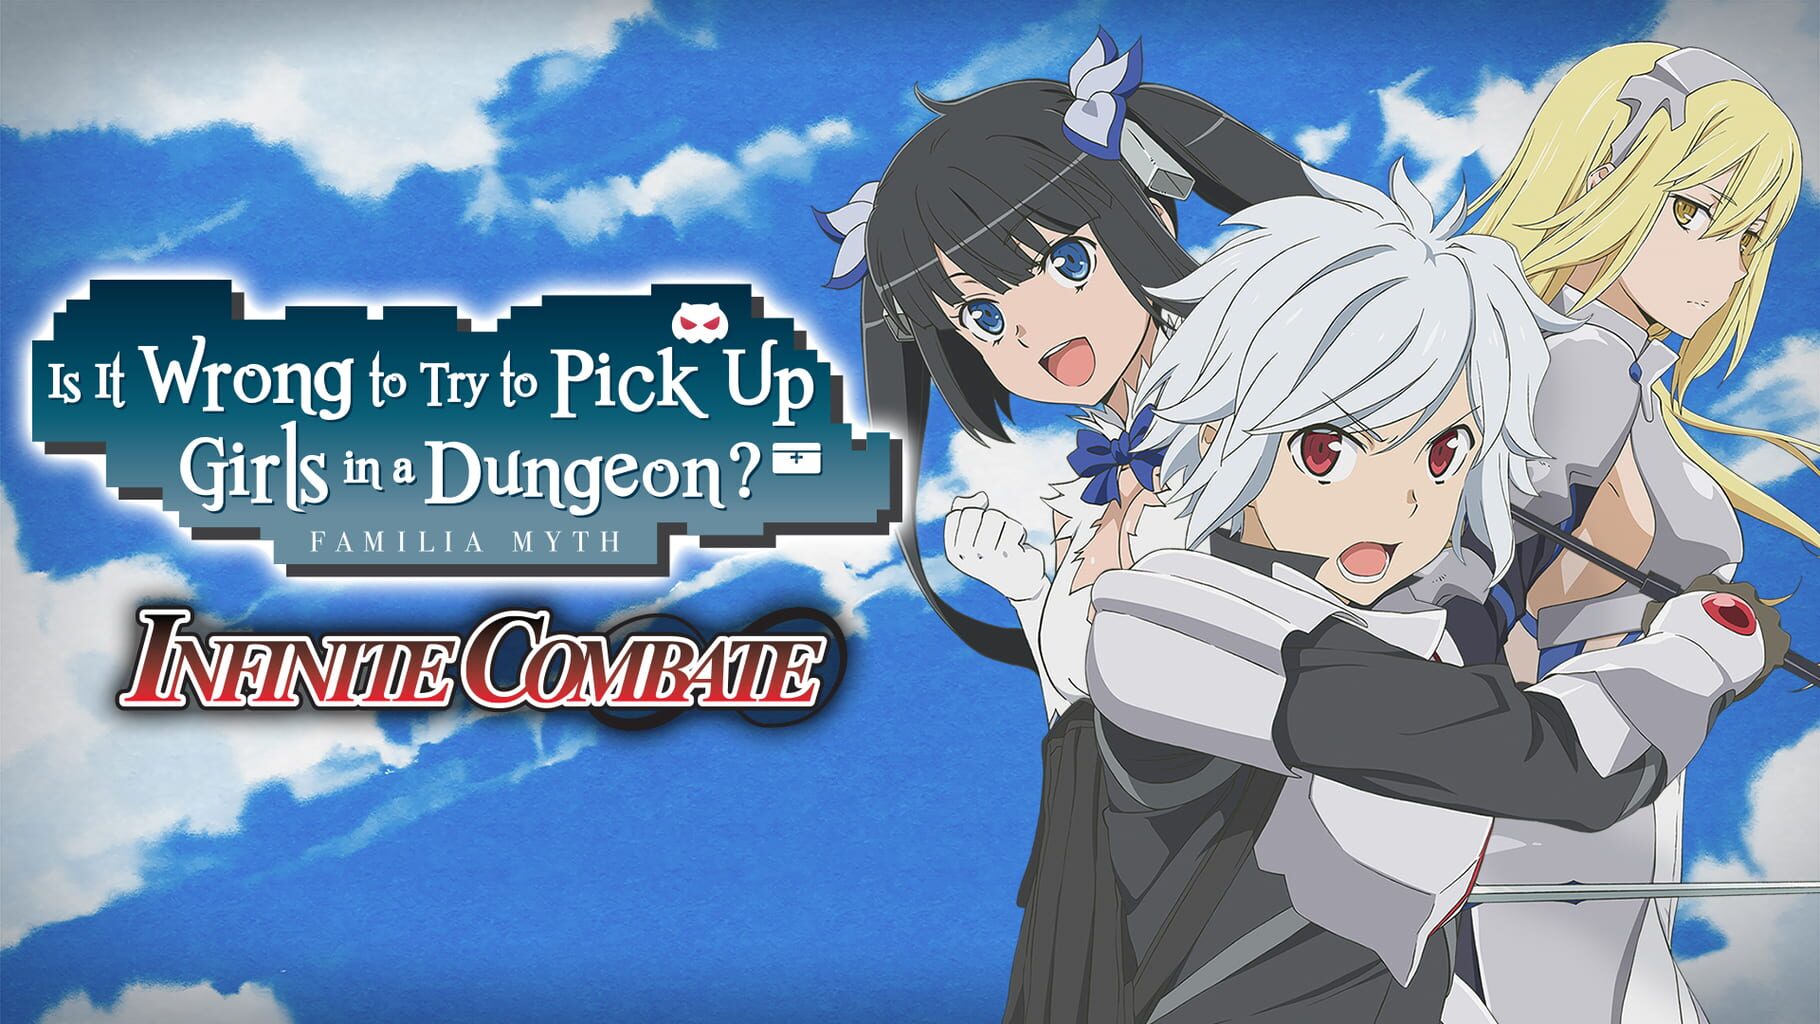 Is It Wrong to Try to Pick Up Girls in a Dungeon? Infinite Combate Image